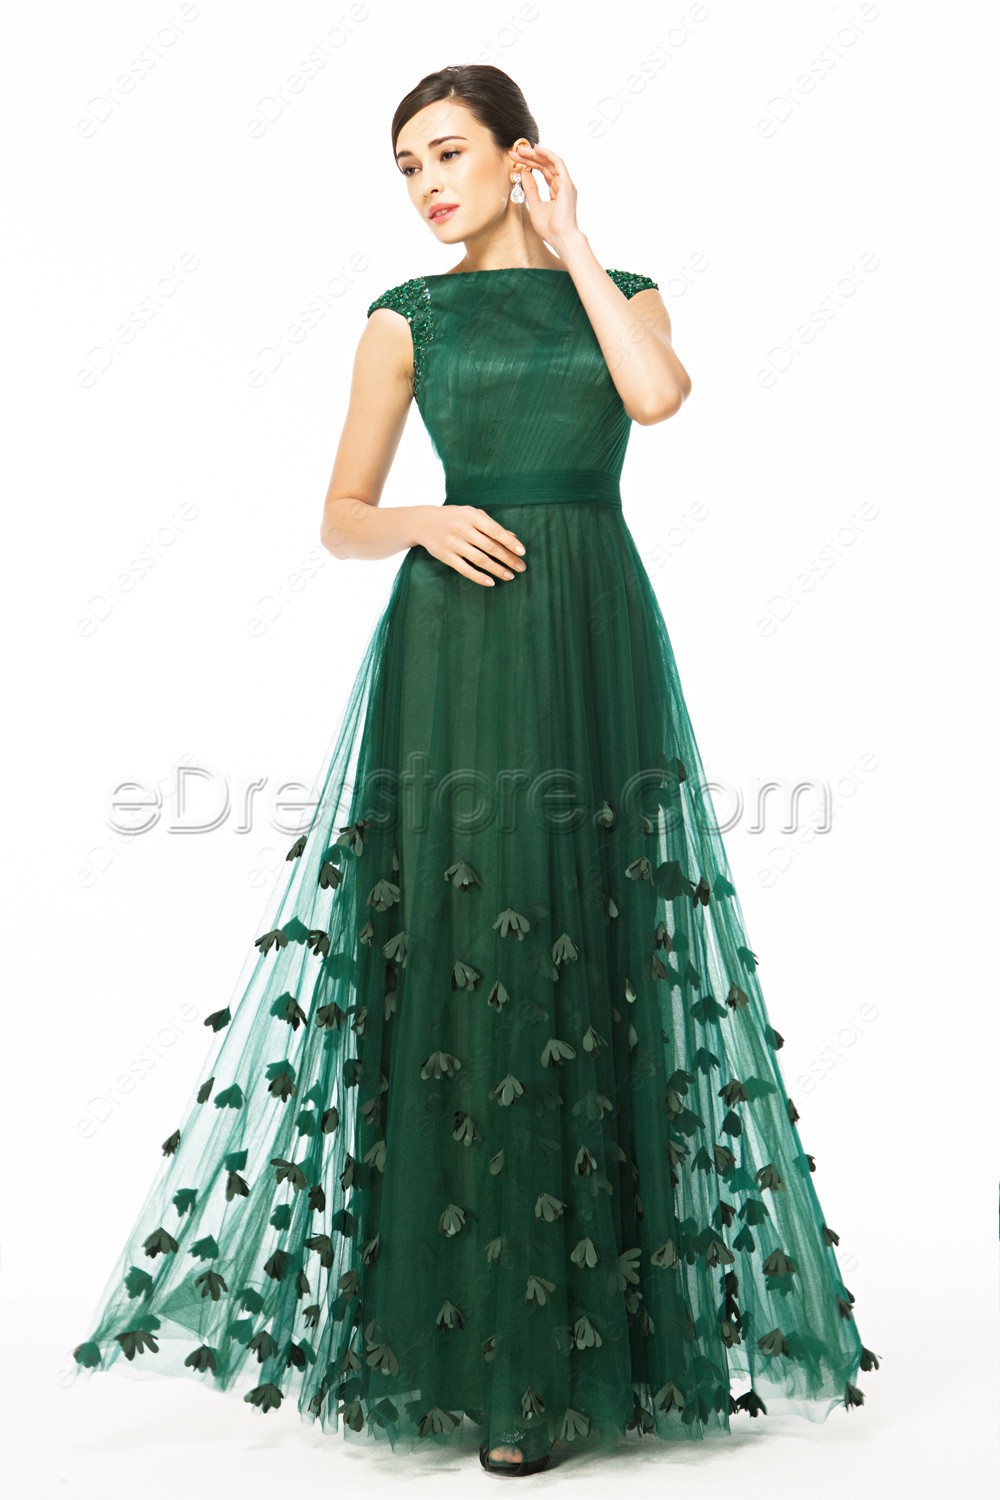 Modest Cap Sleeves Forest Green Prom Dress with Hand Sewn